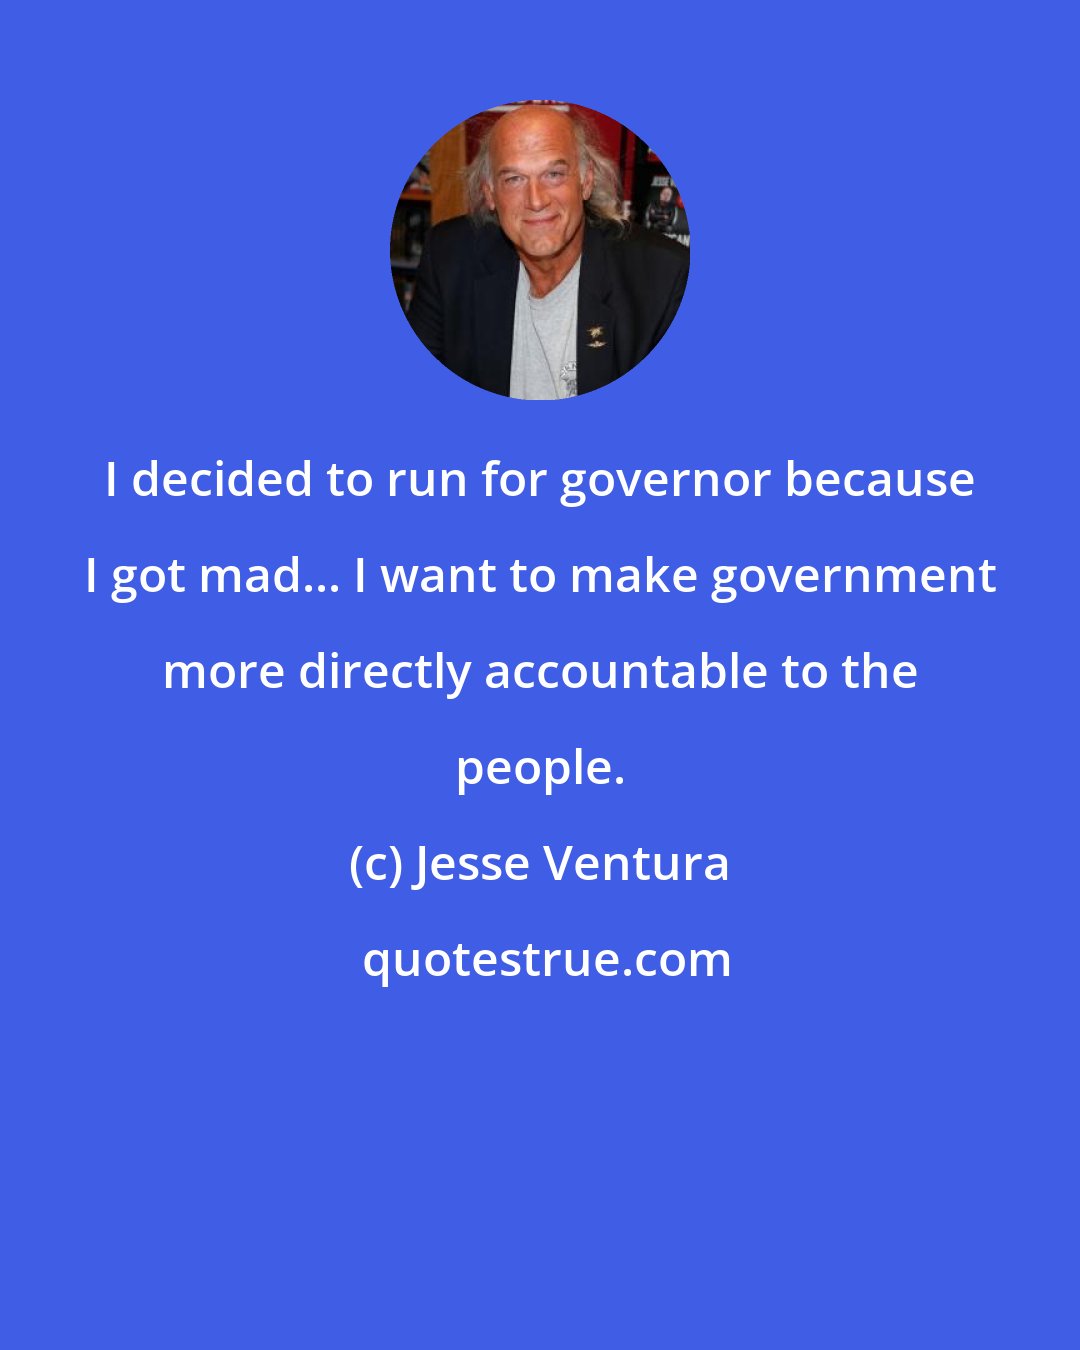 Jesse Ventura: I decided to run for governor because I got mad... I want to make government more directly accountable to the people.